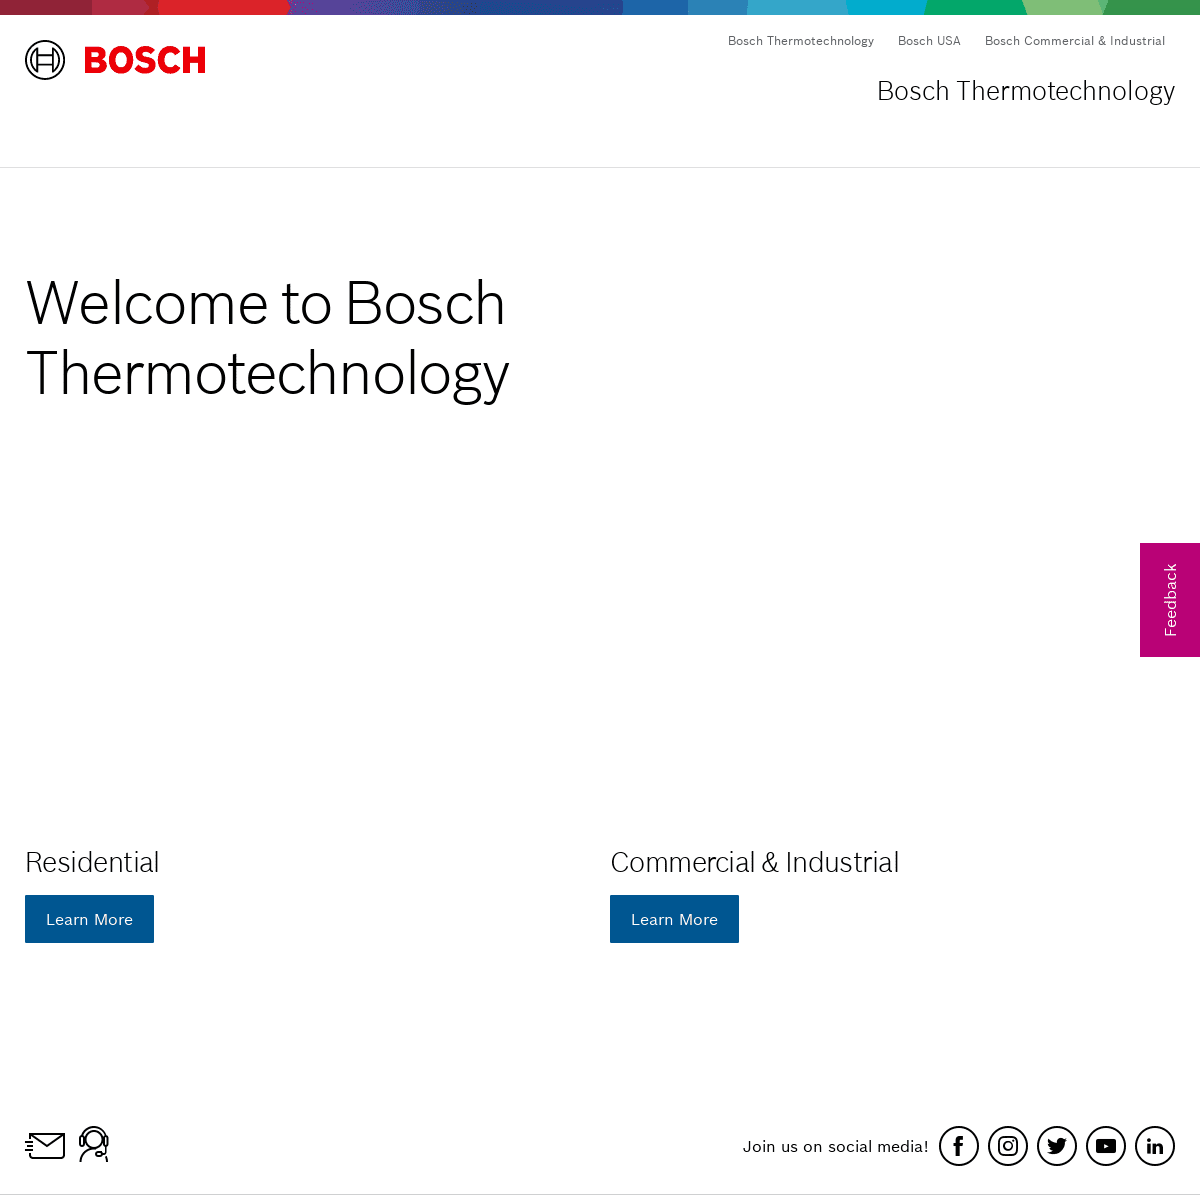 A complete backup of https://bosch-thermotechnology.us